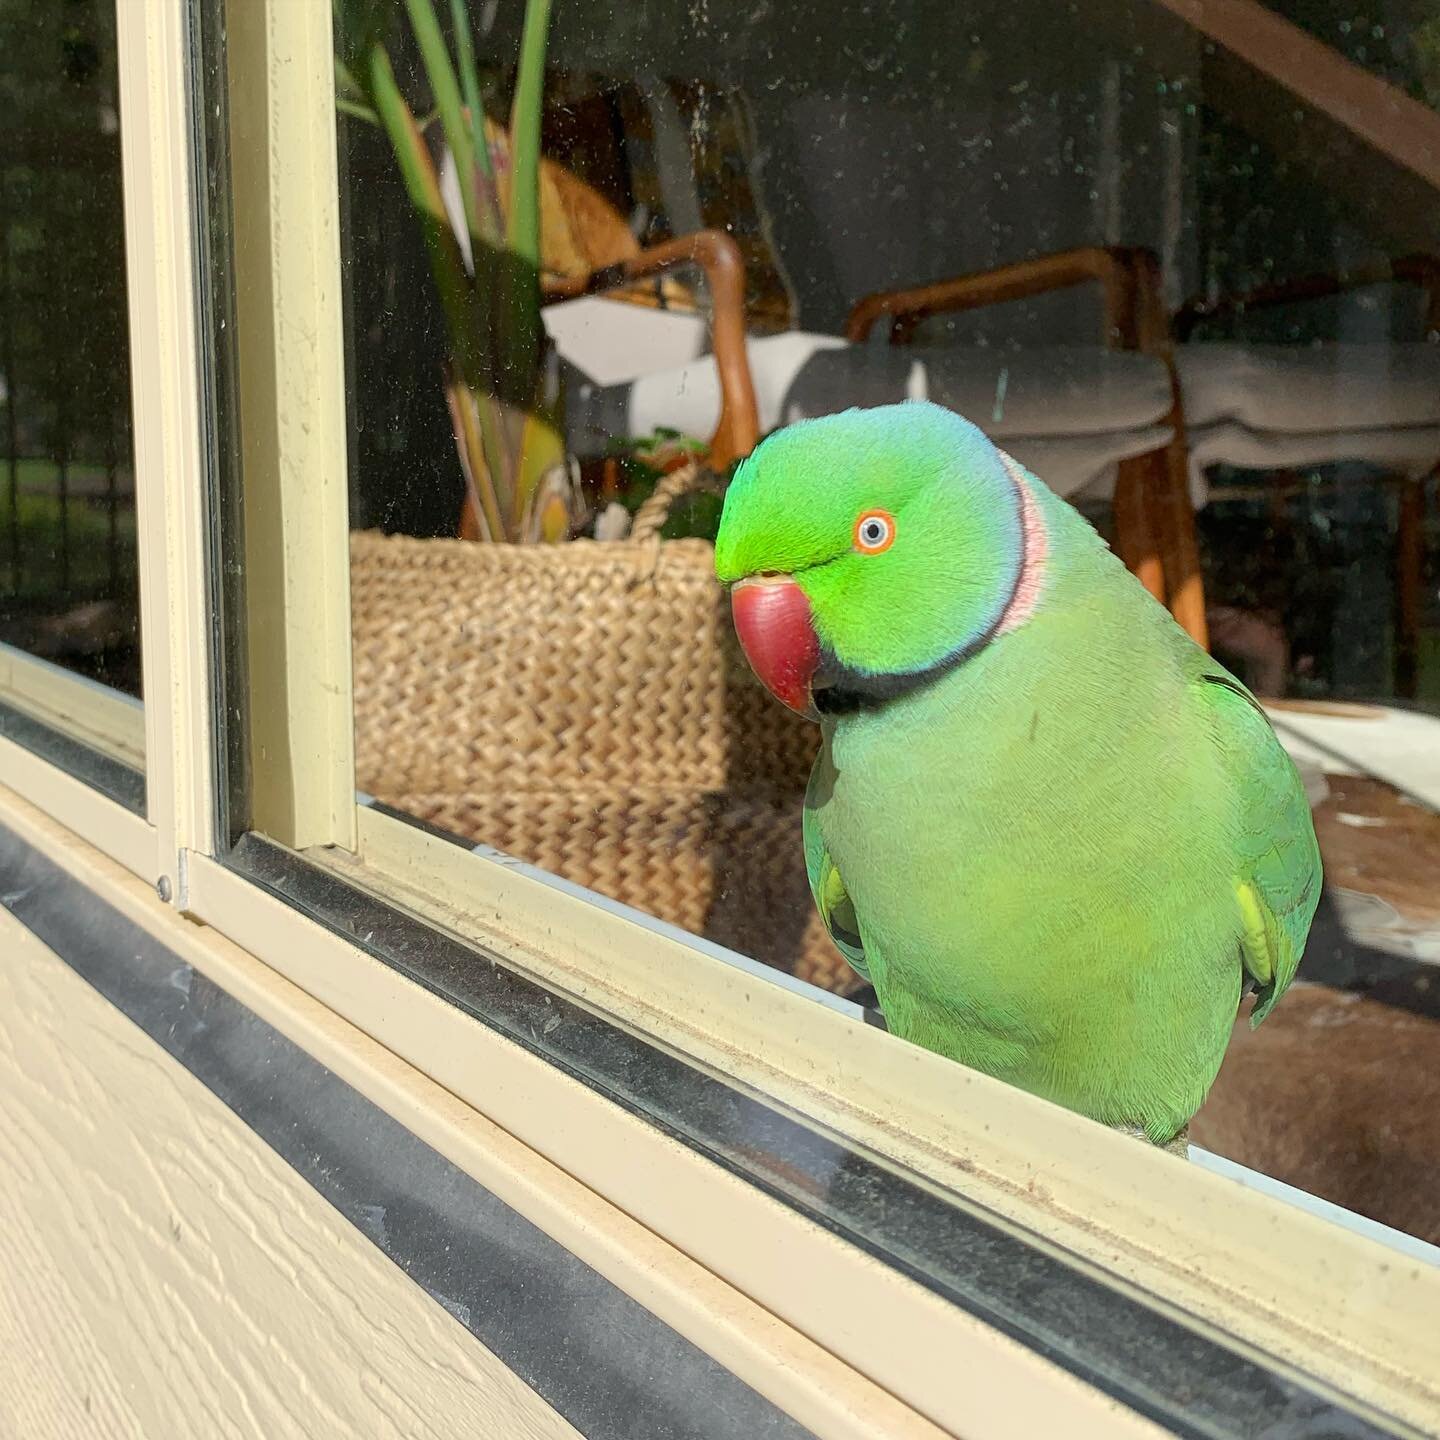 This sweet little man at the window, watching us as we sit in the sun outside 🥰